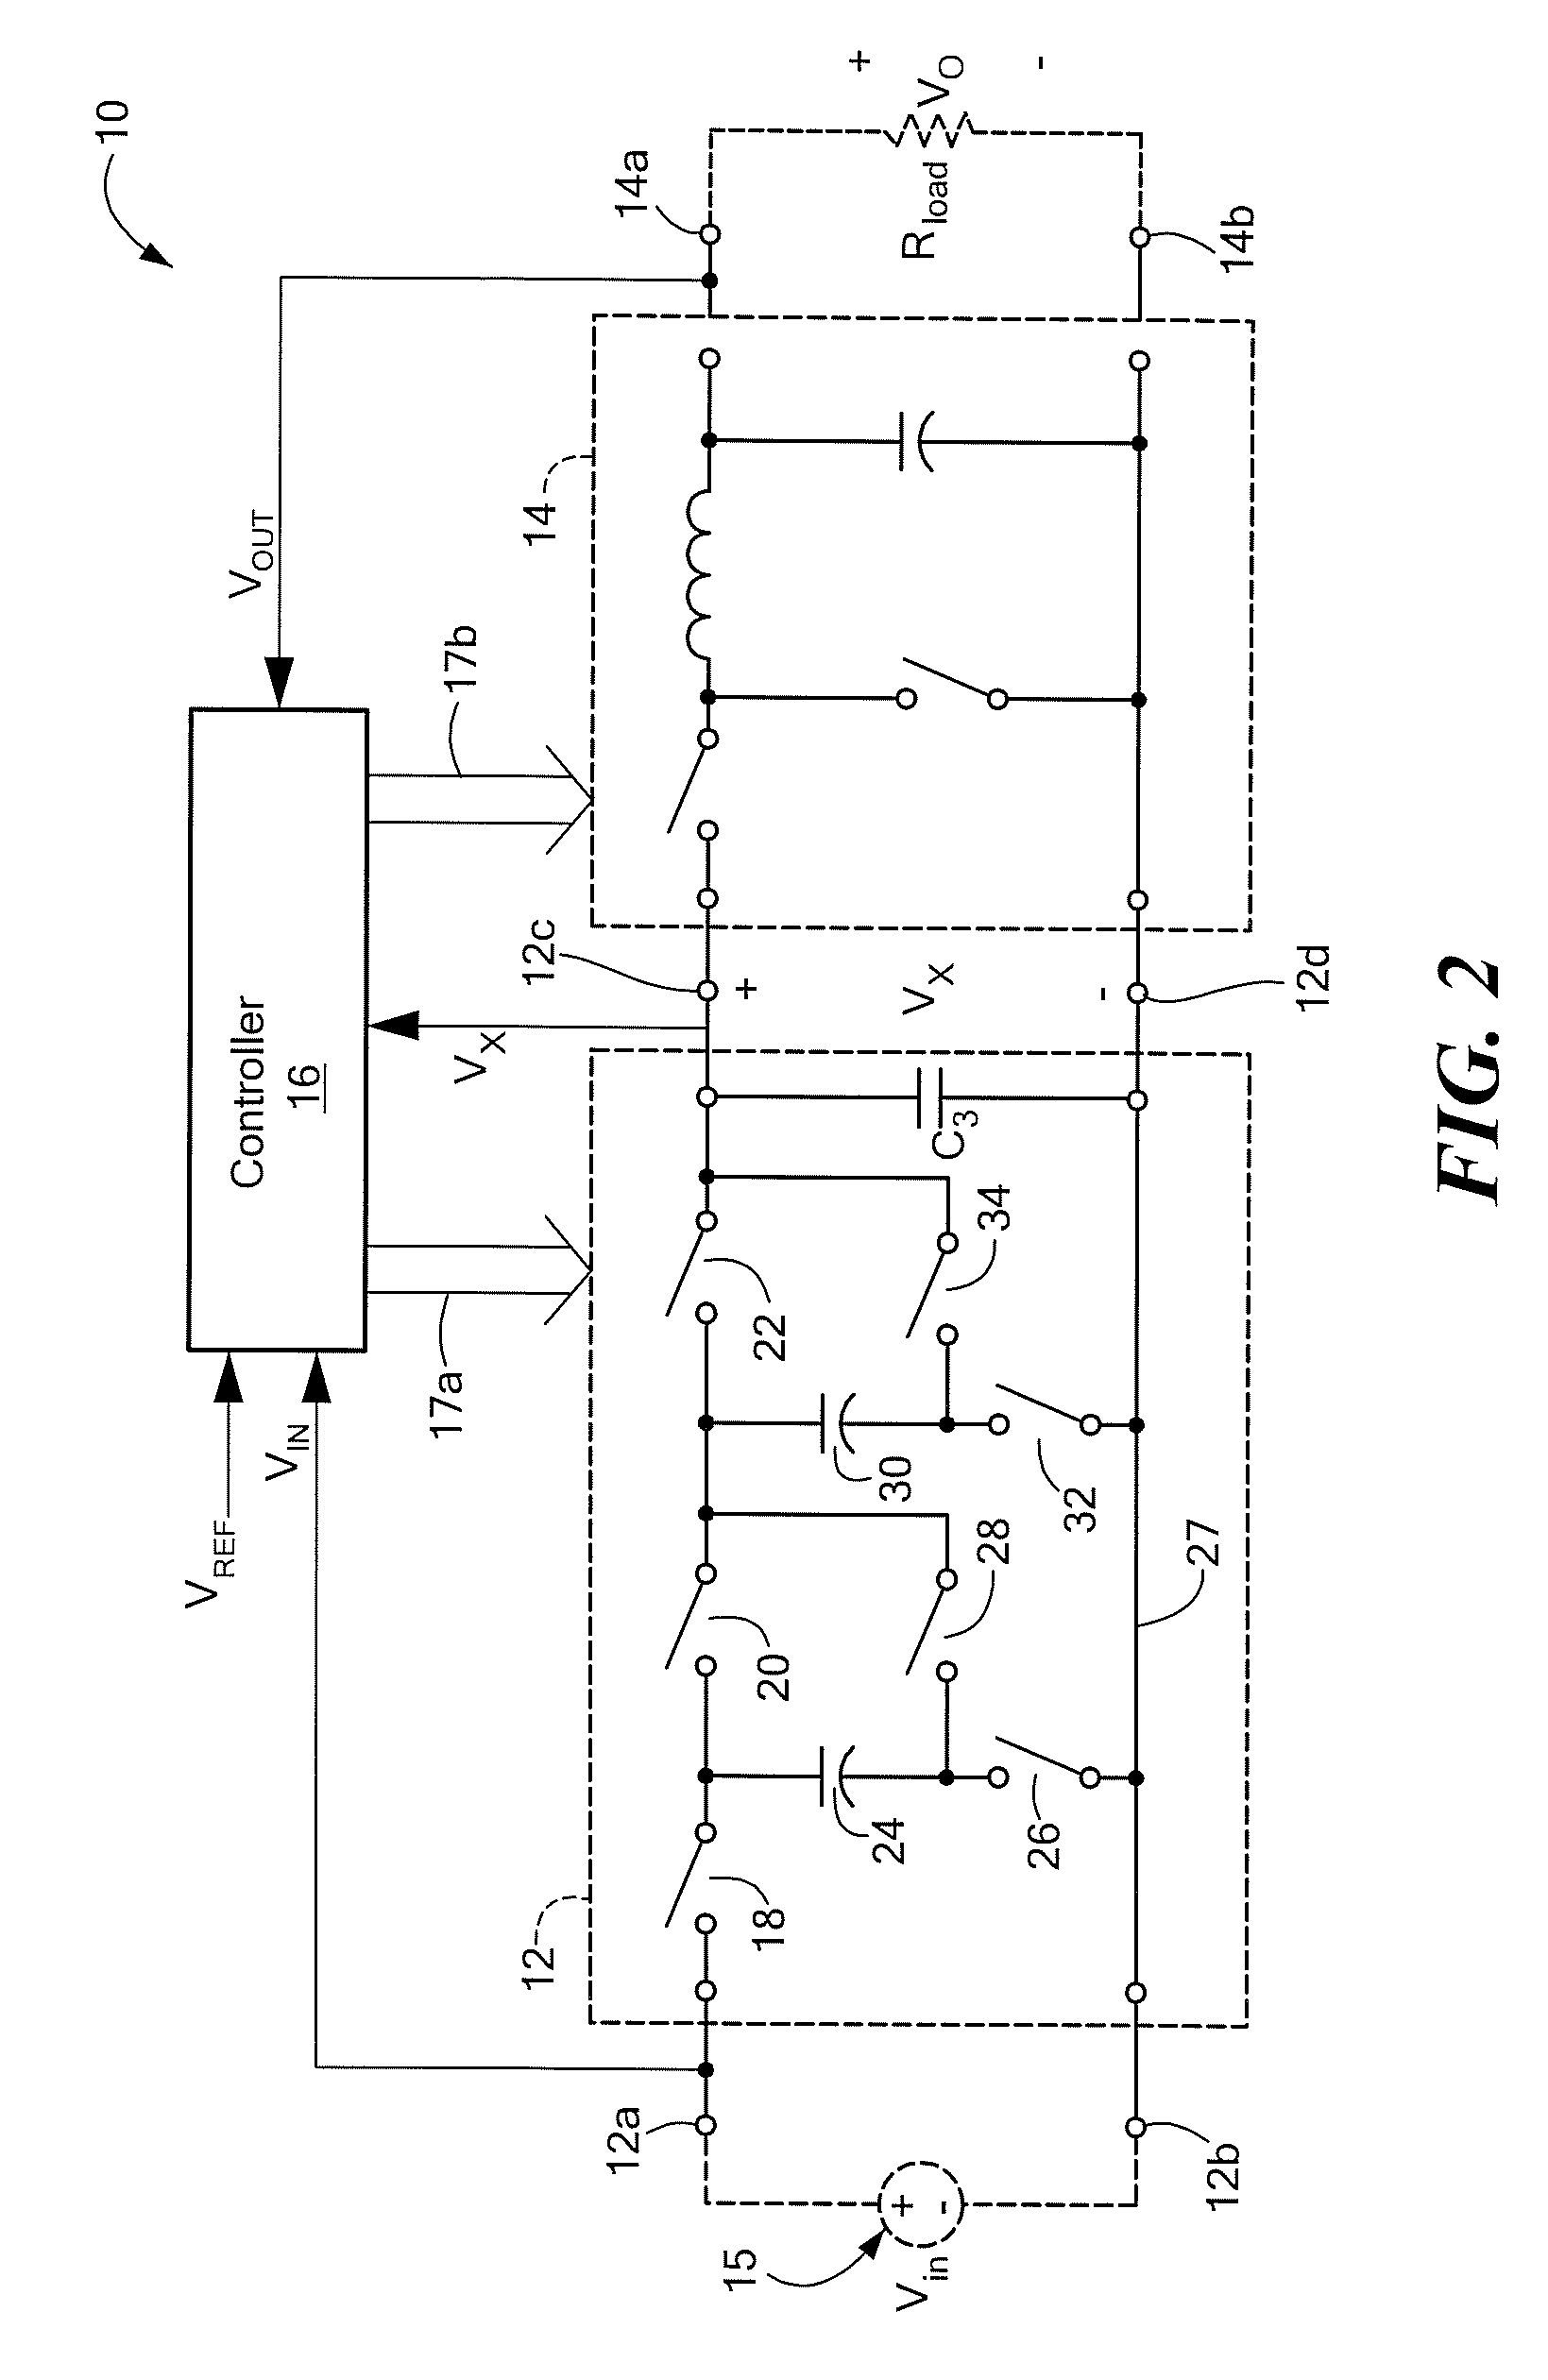 Power converter with capacitive energy transfer and fast dynamic response